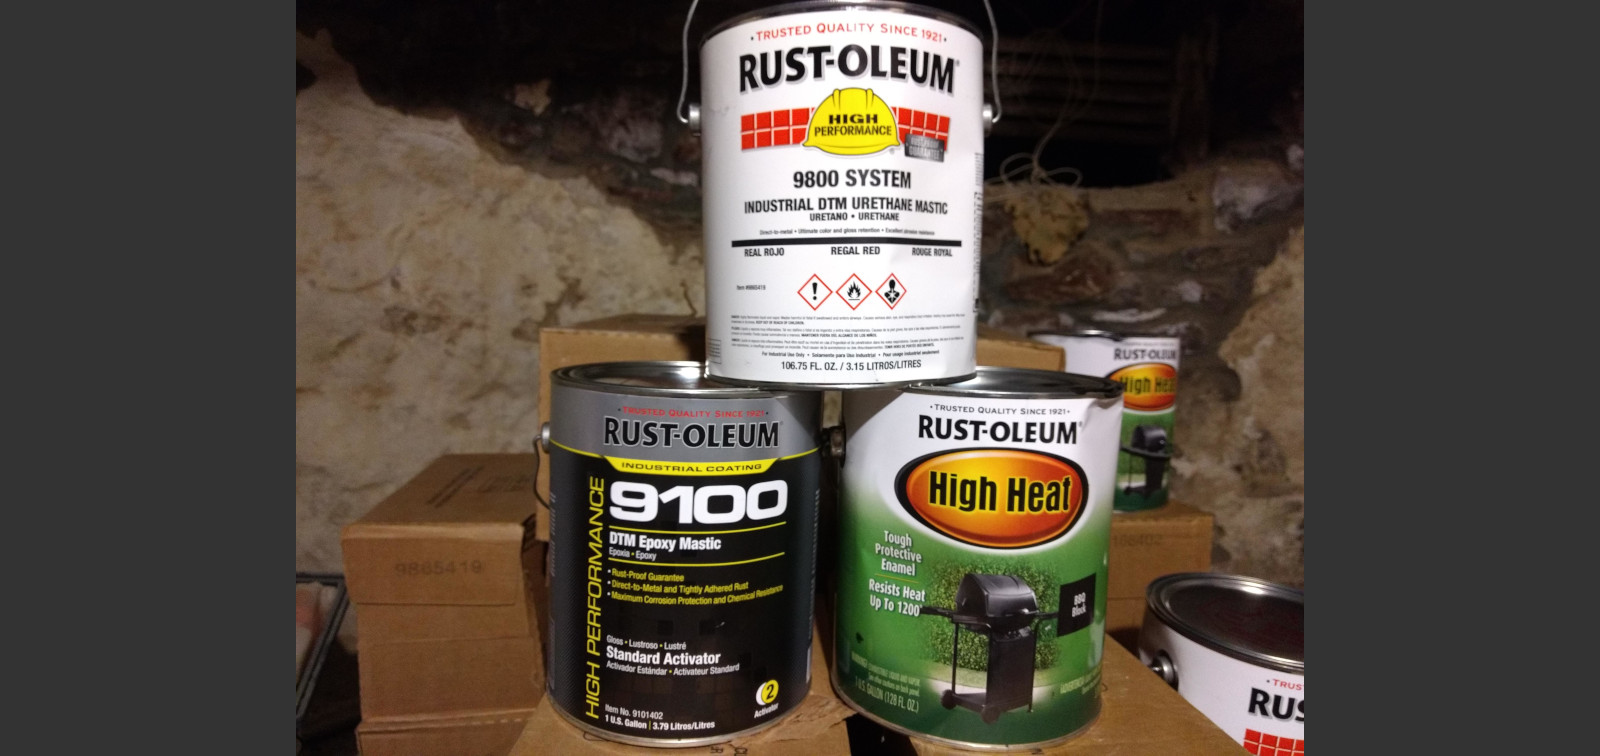 3 gallon cans of Rustoleum paint stacked